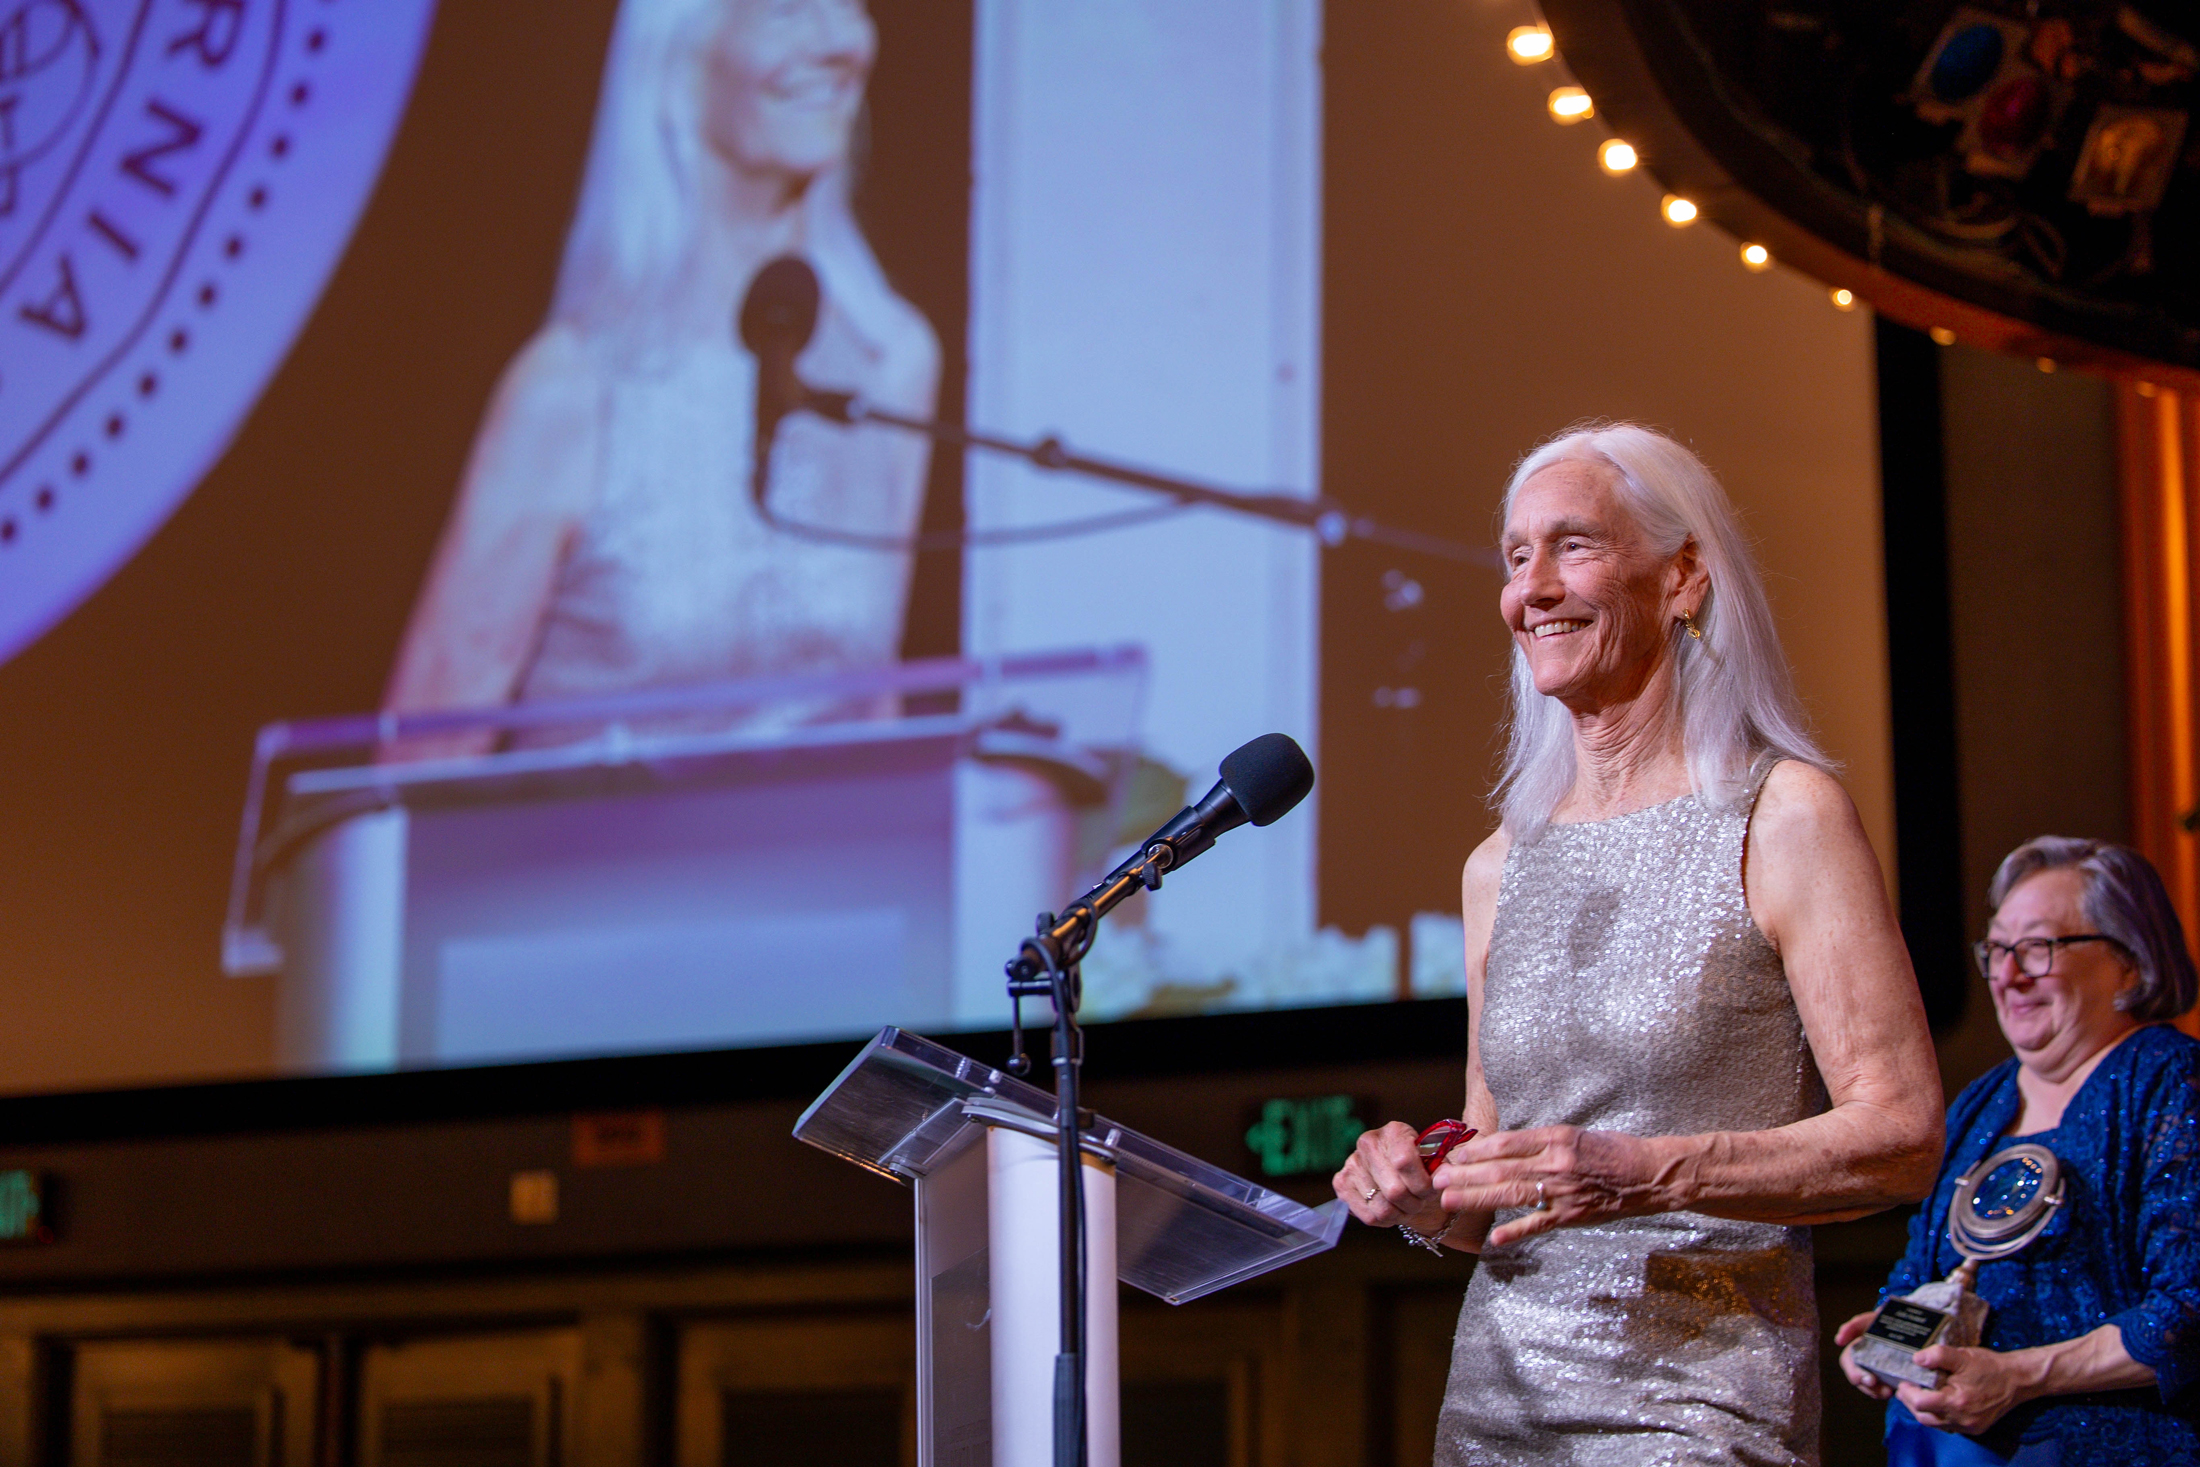 Julie Packard, woman with long white hair in a silvery gown, speaks at a podium, a screen showing her image behind her, with UC Santa Cruz Chancellor Cynthia Larive, in short gray hair and a blue dress, looks on